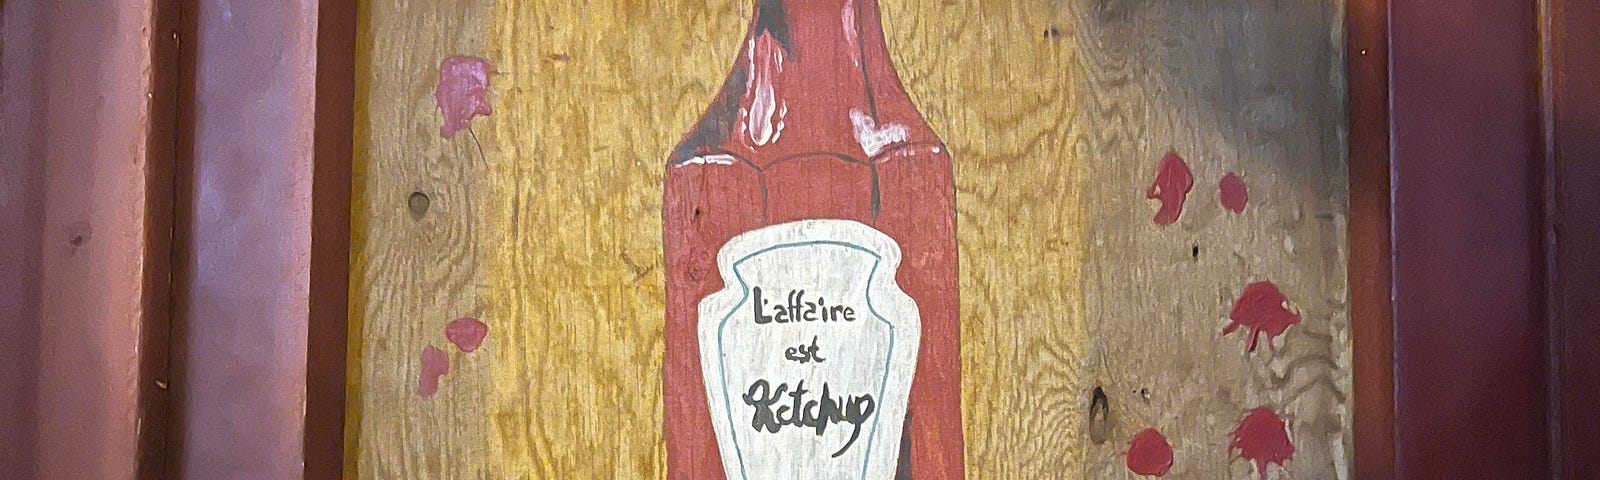 The front door to the restaurant, with an old fashioned ketchup bottle painted on plywood.